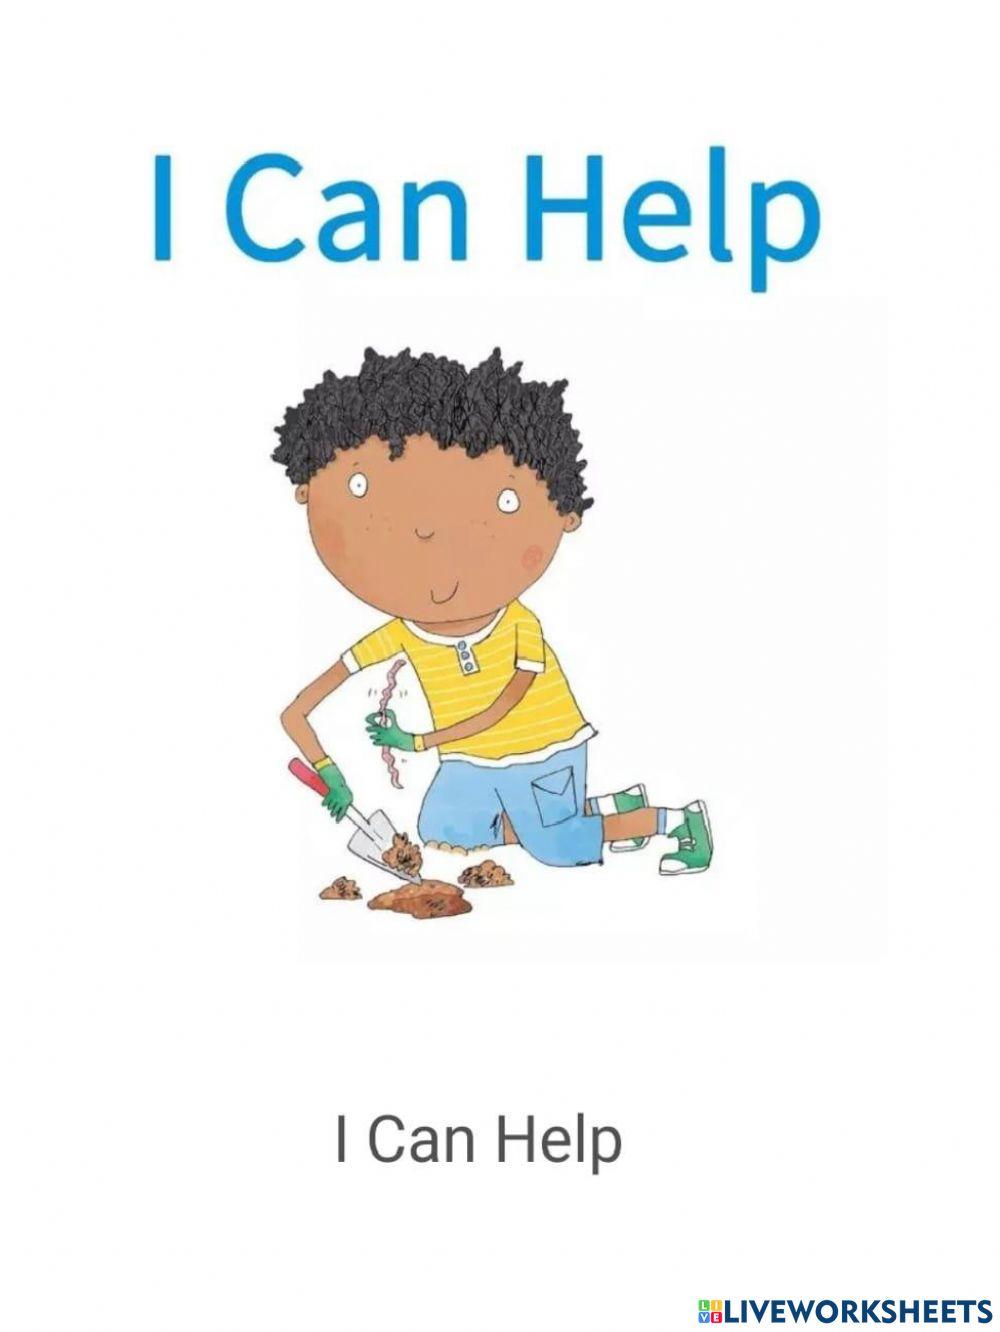 I can help story